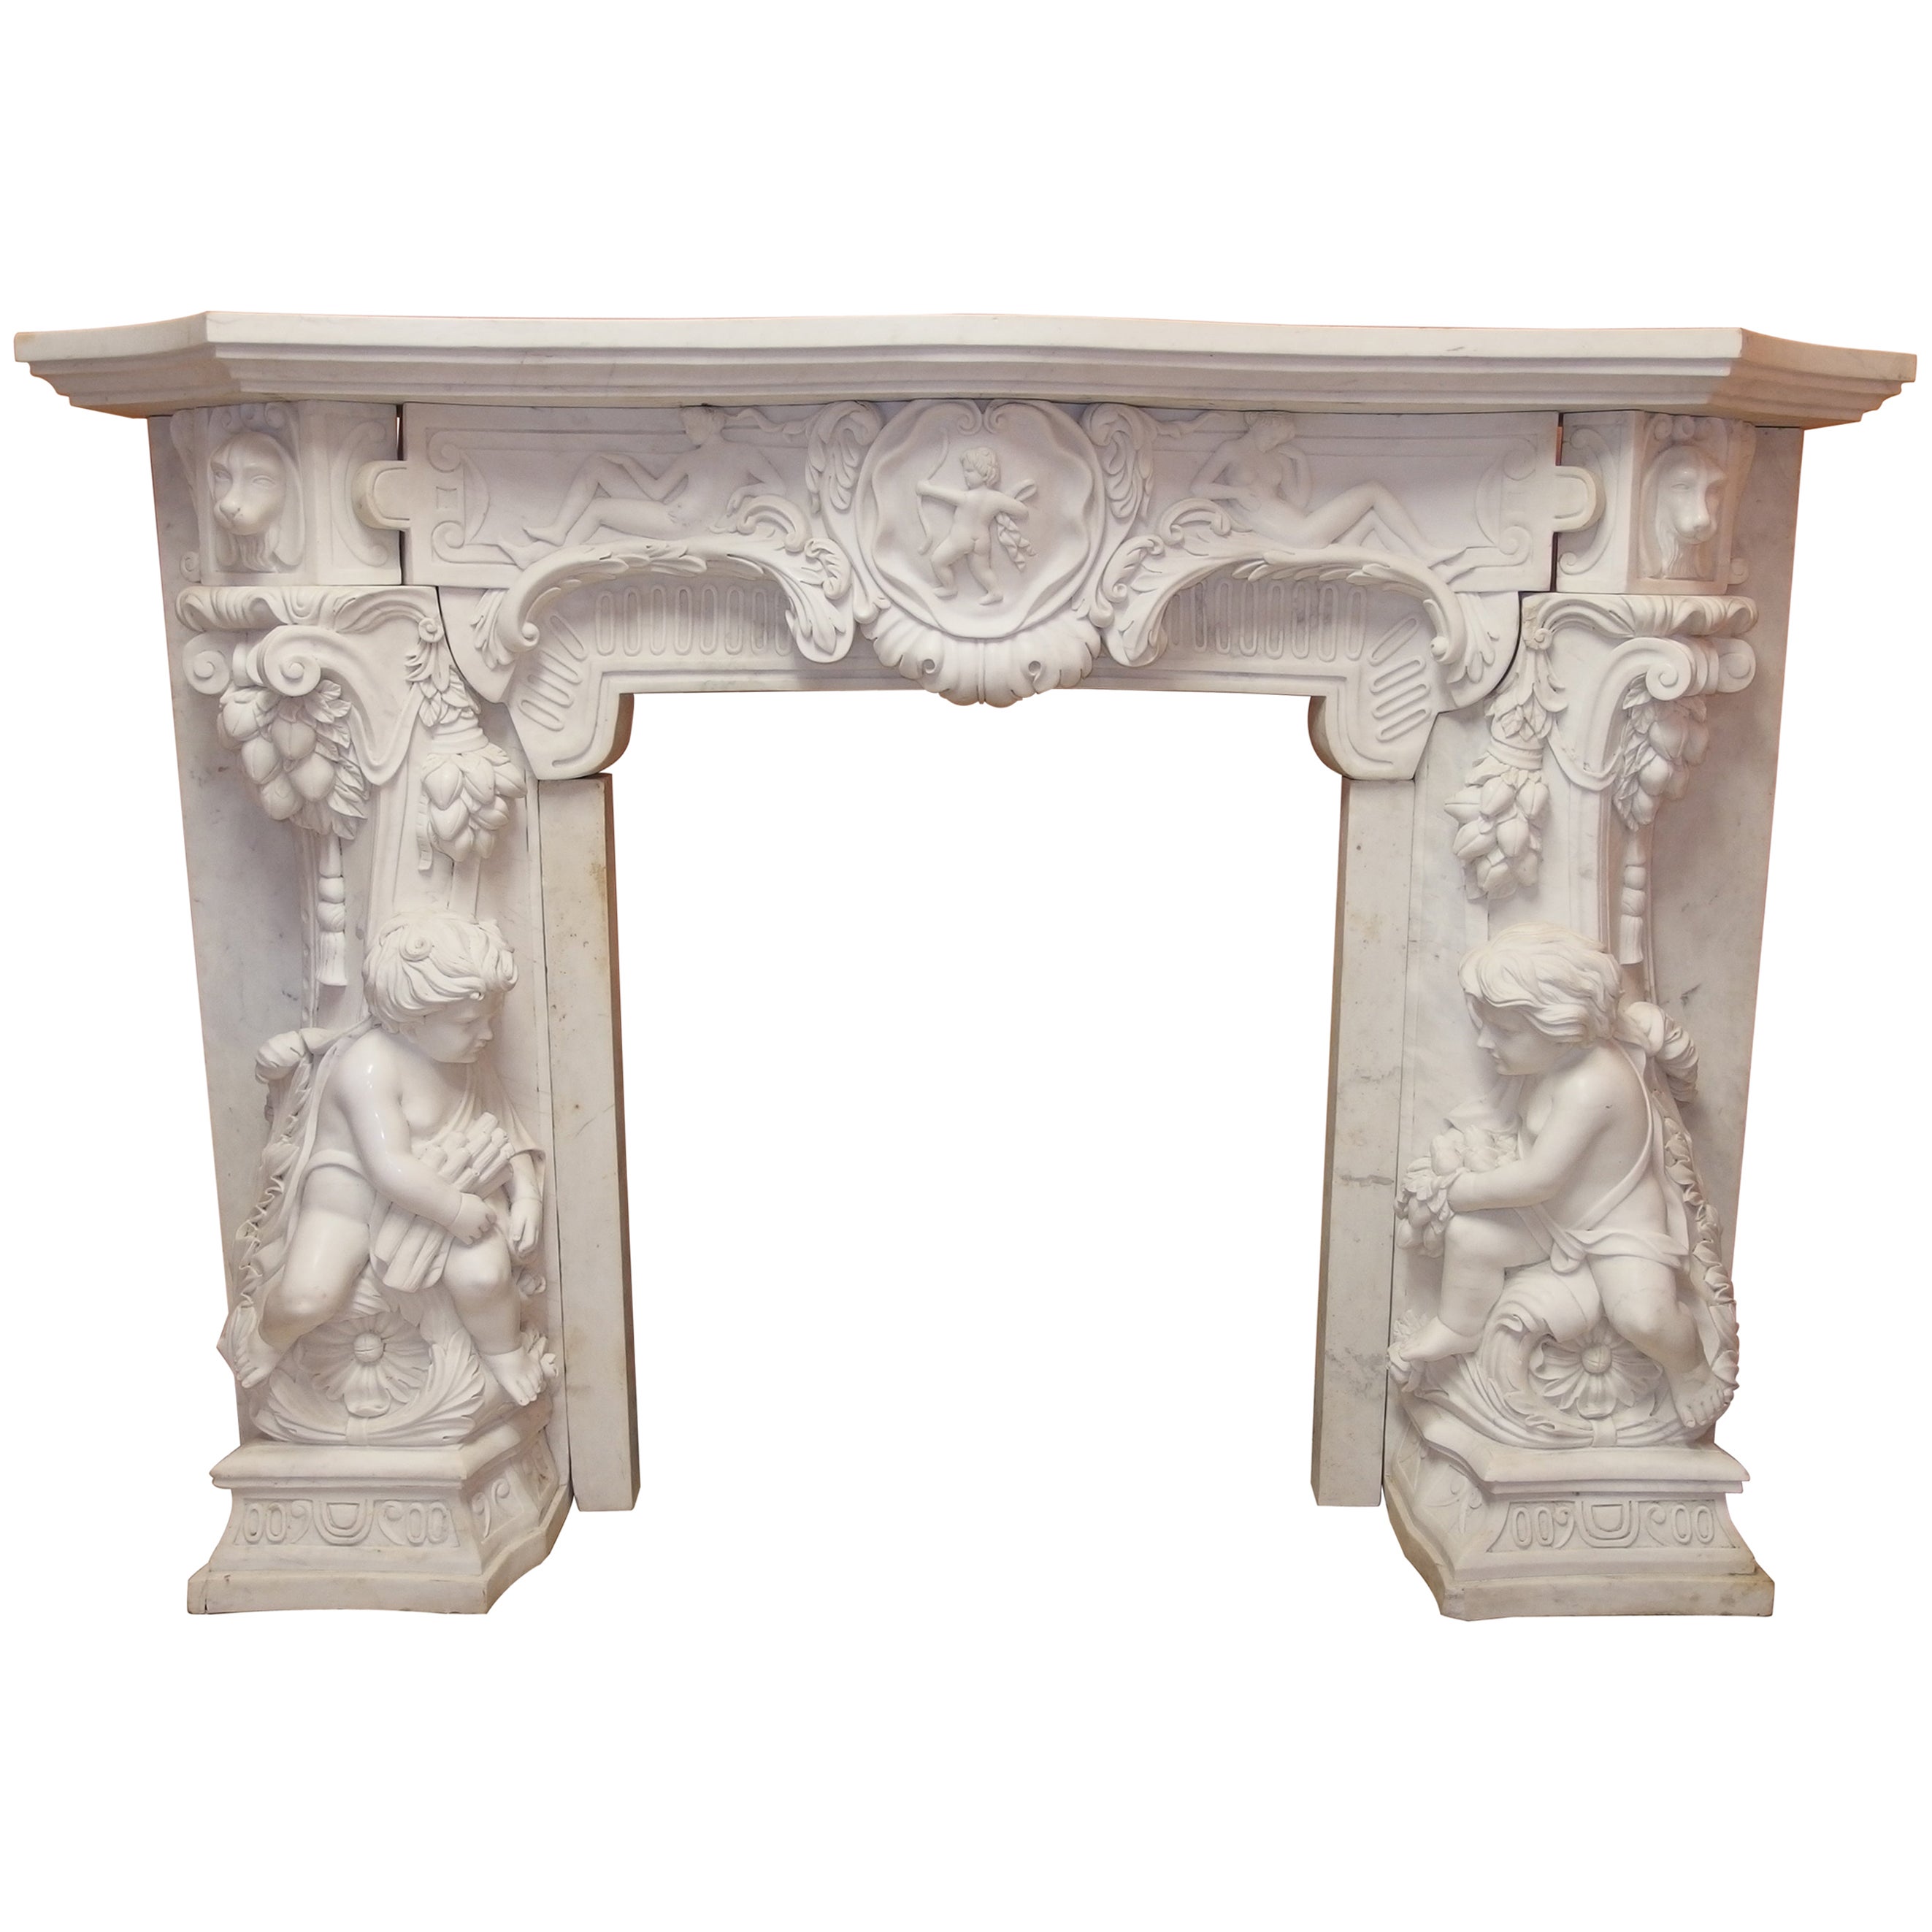 White Statuary Marble Fireplace, Richly Carved with Cherubs, Cupid, Dogs, Italy